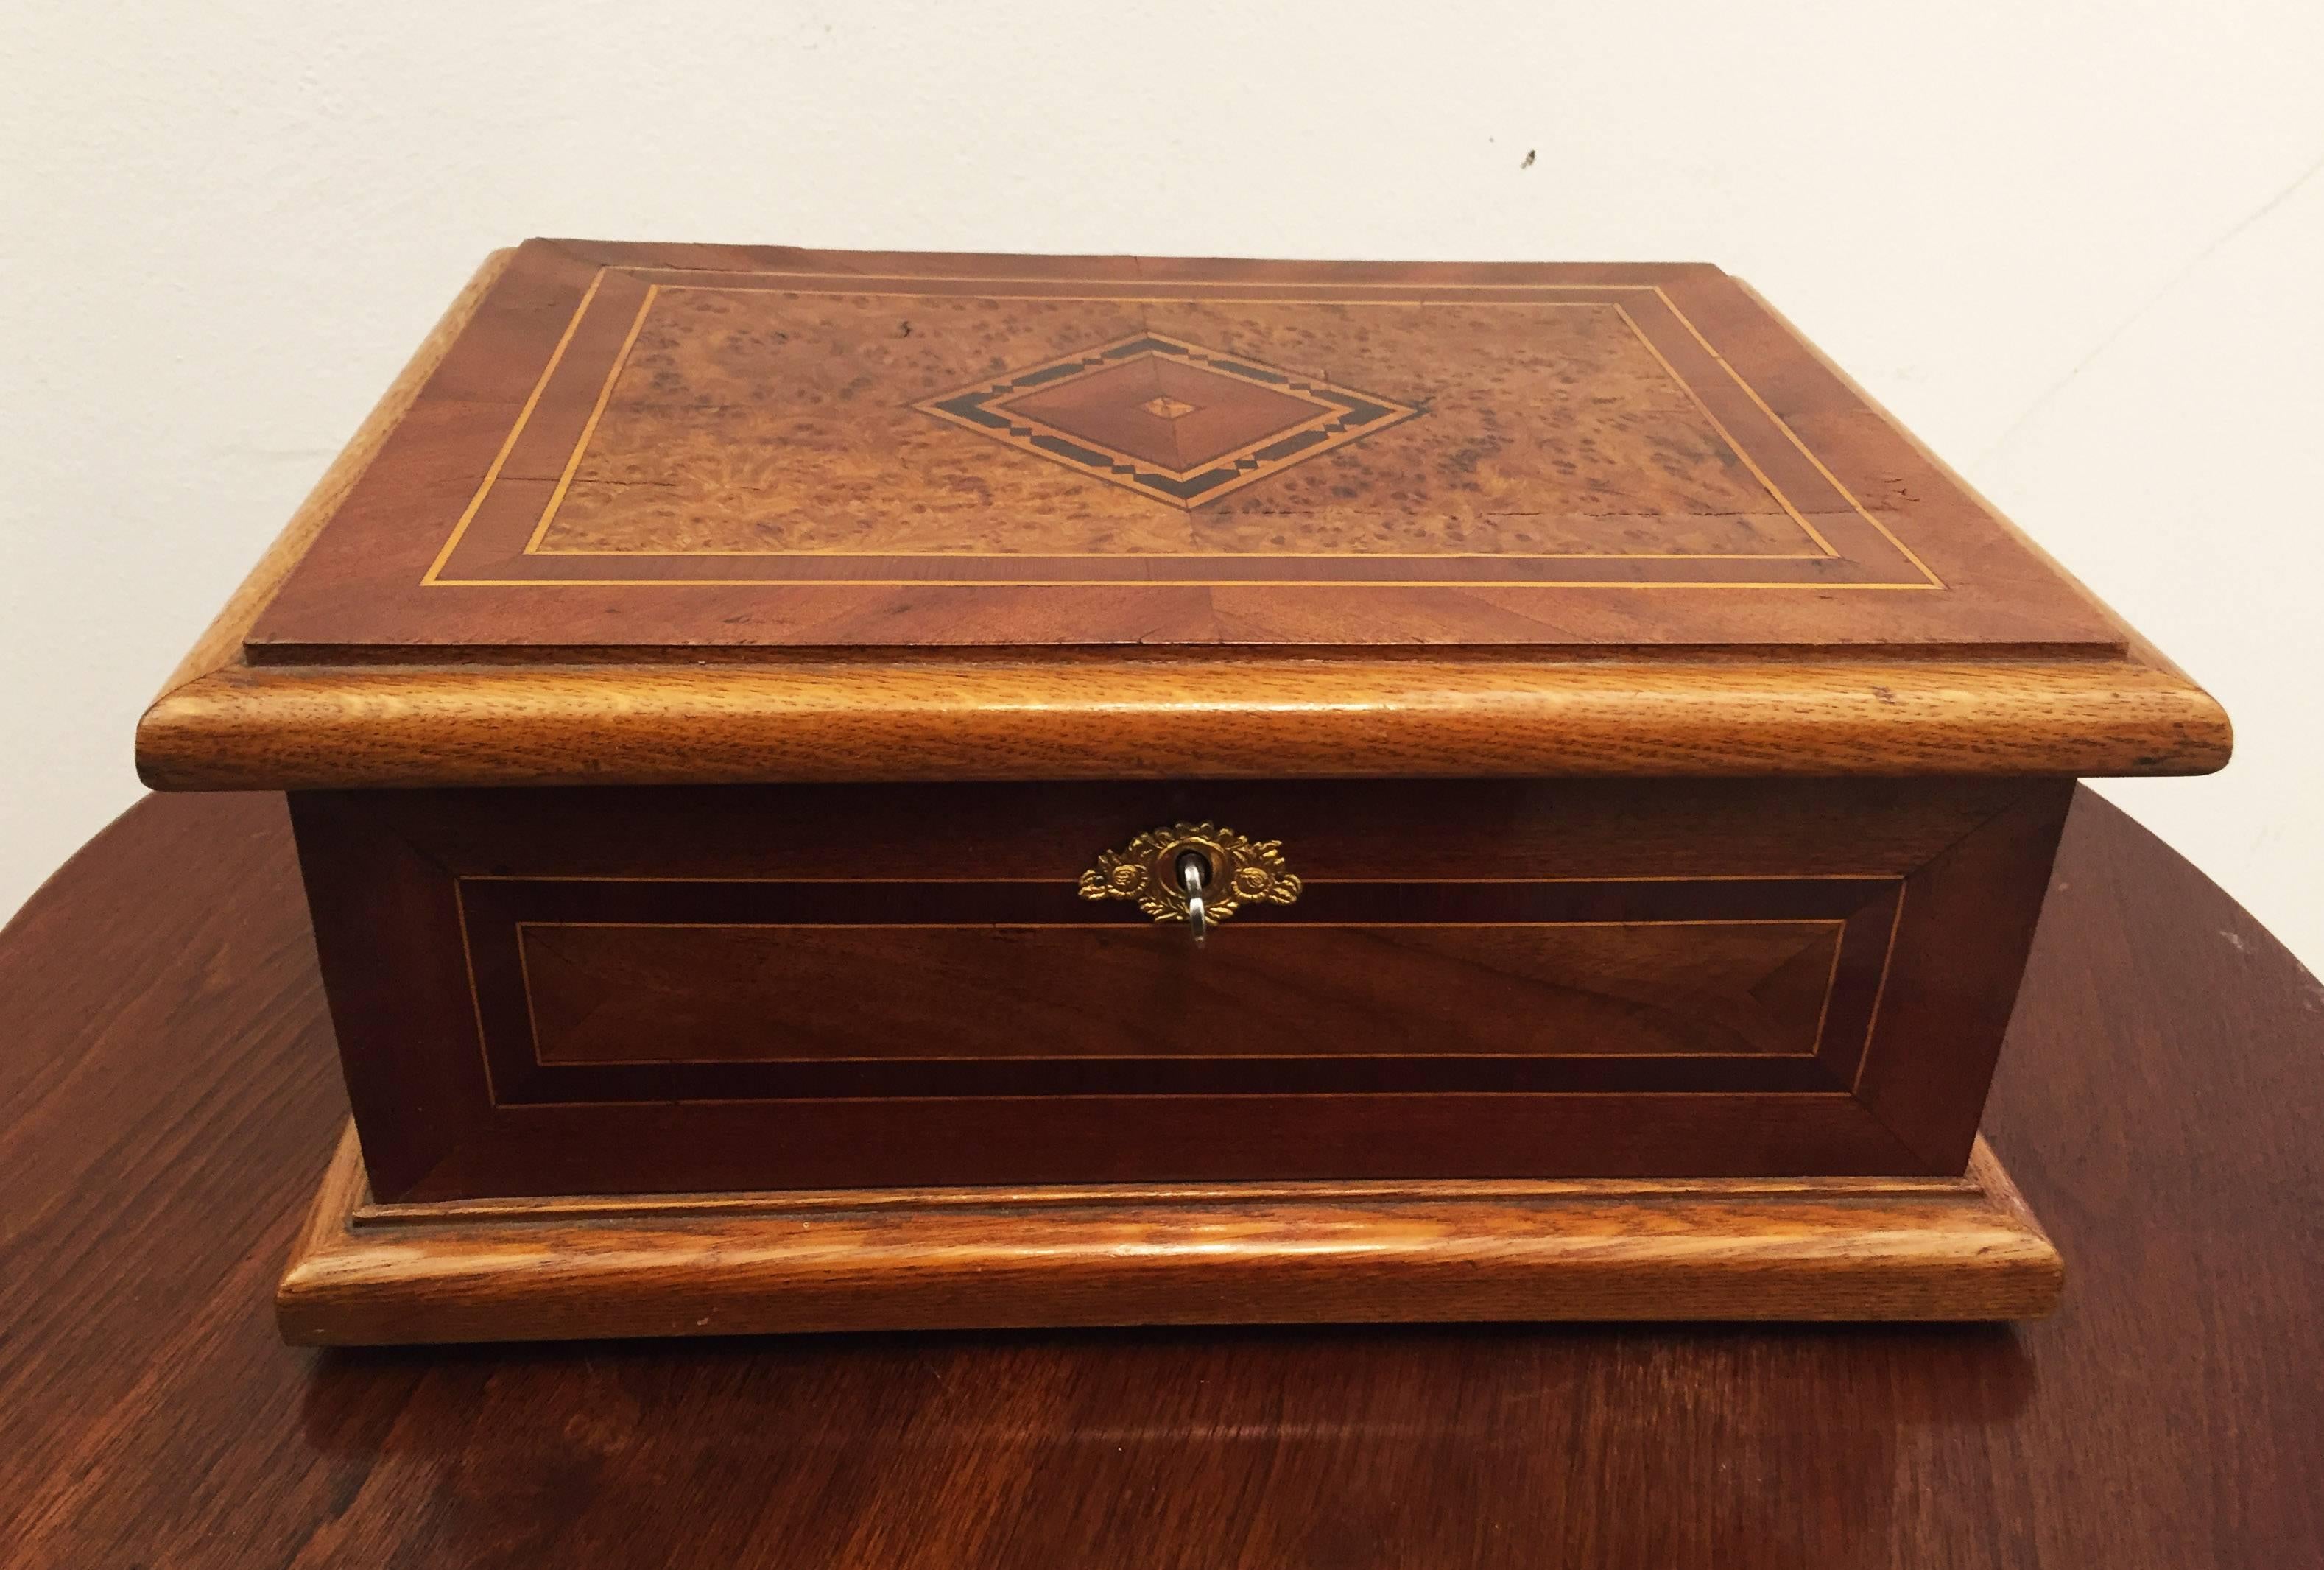 Wooden box with beautiful marquetry work made in Vienna in 1924.